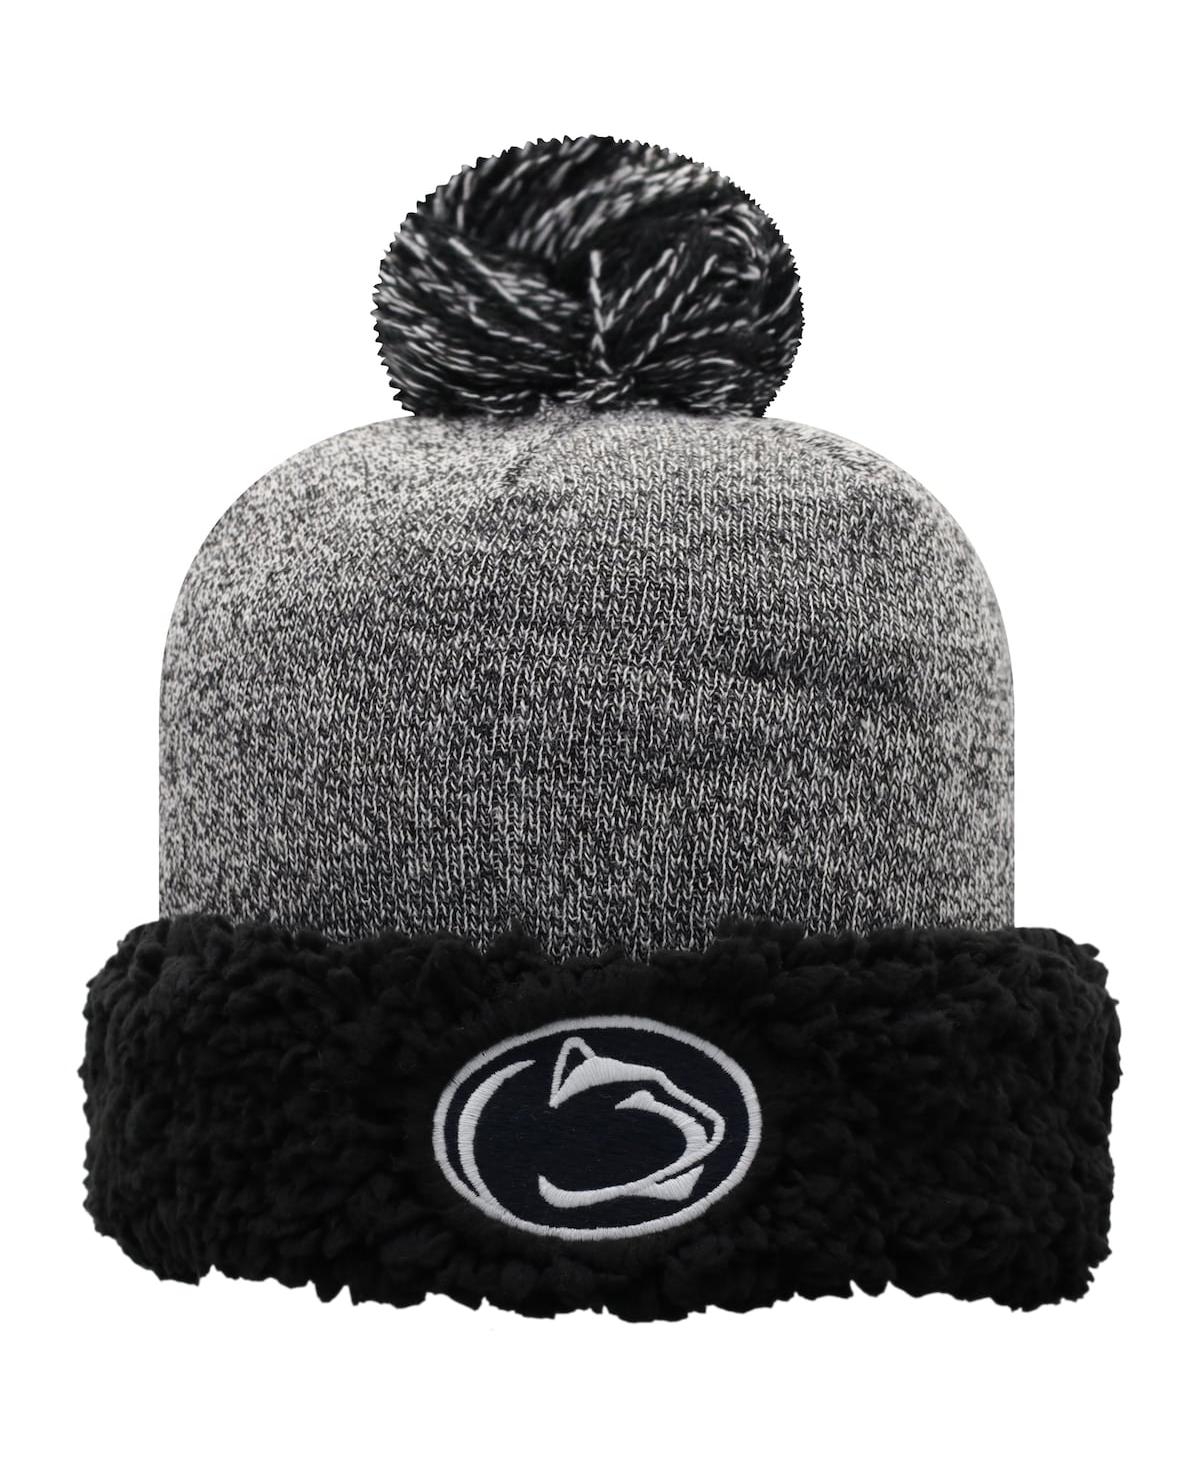 Women's Top of the World Black Penn State Nittany Lions Snug Cuffed Knit Hat with Pom - Black